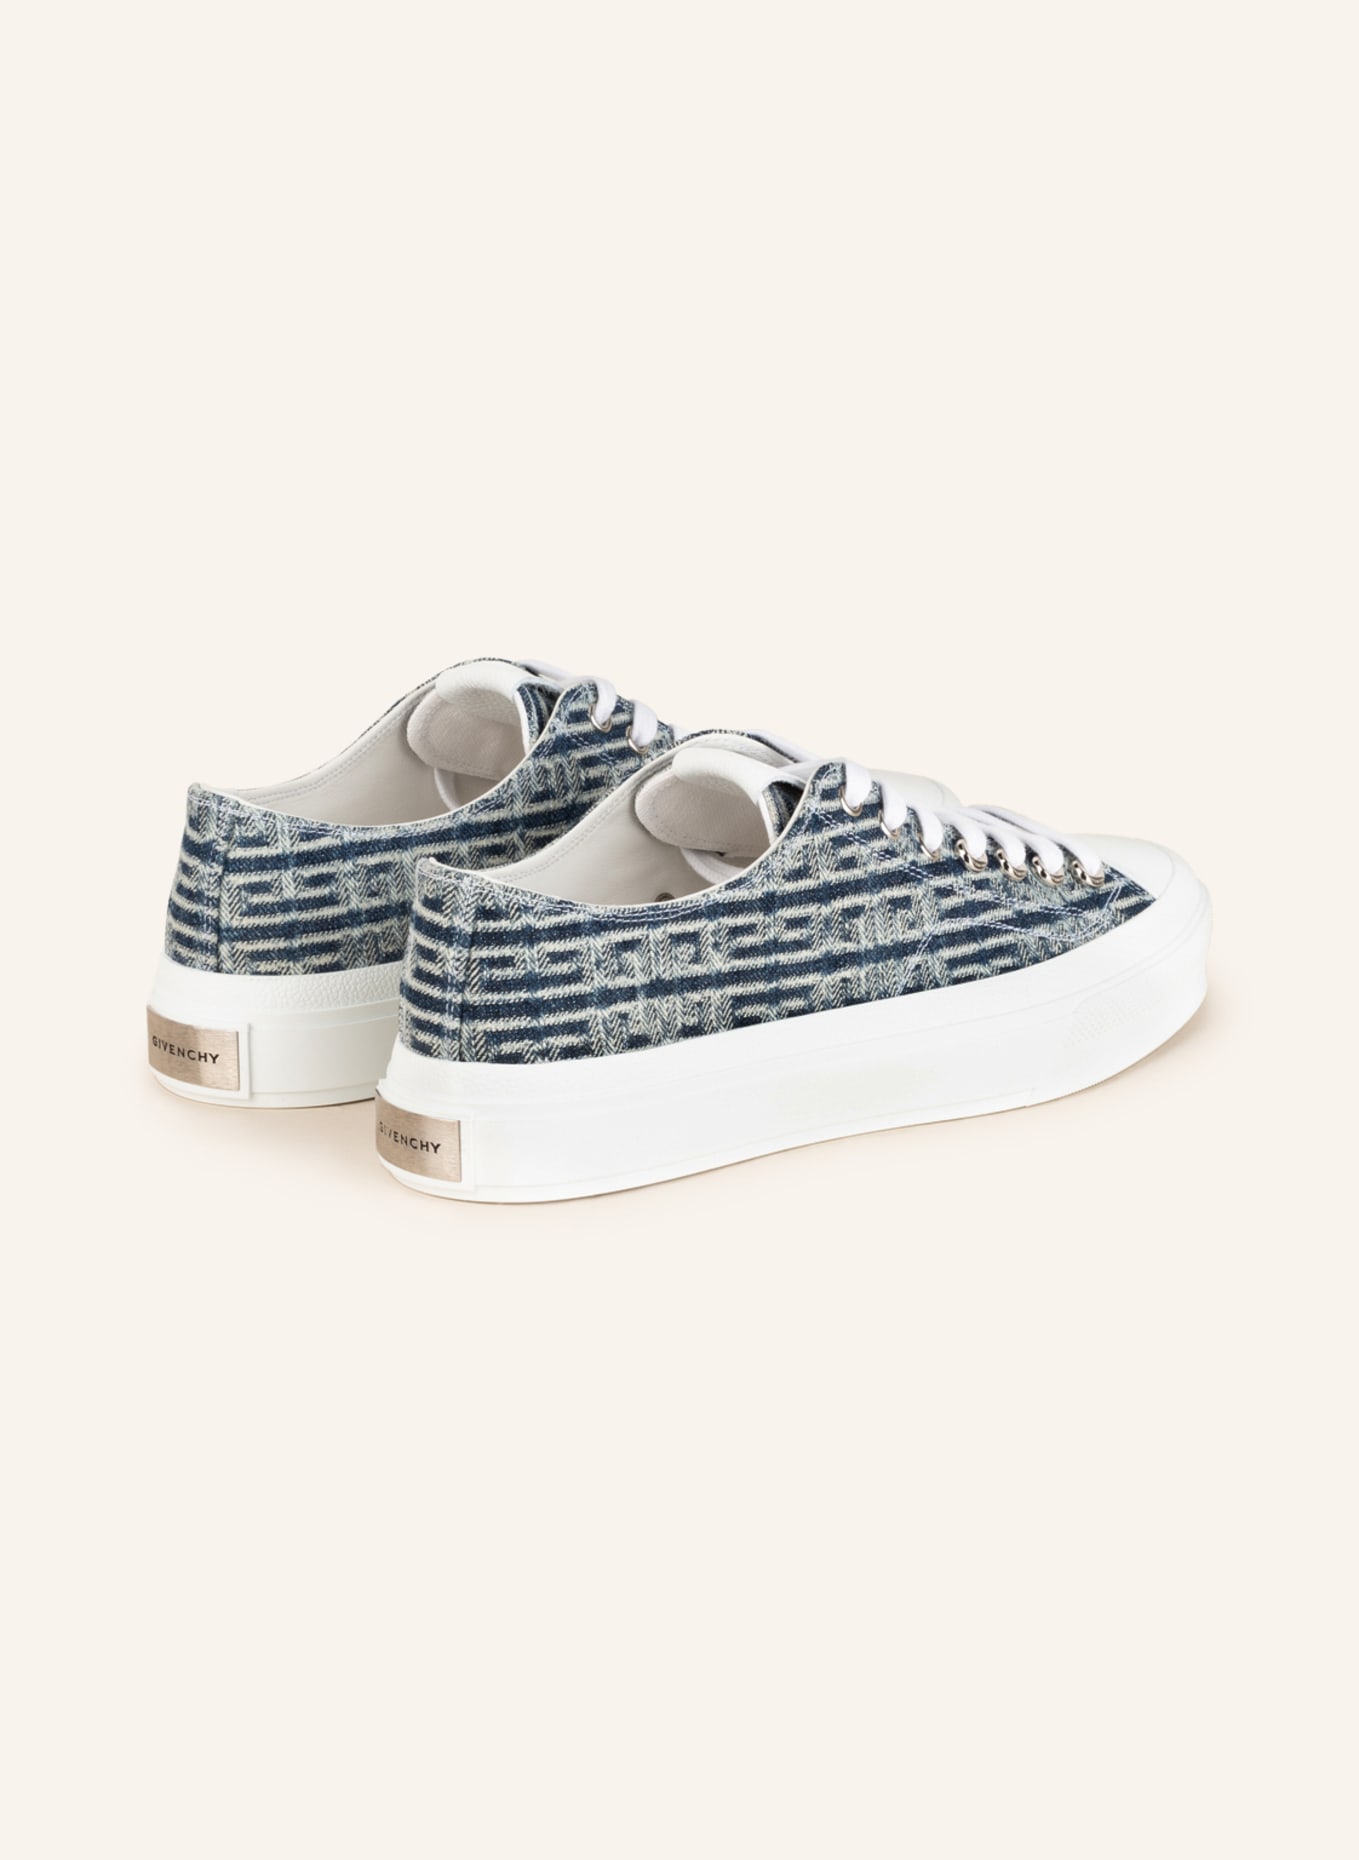 GIVENCHY Sneakers CITY in blue/ blue